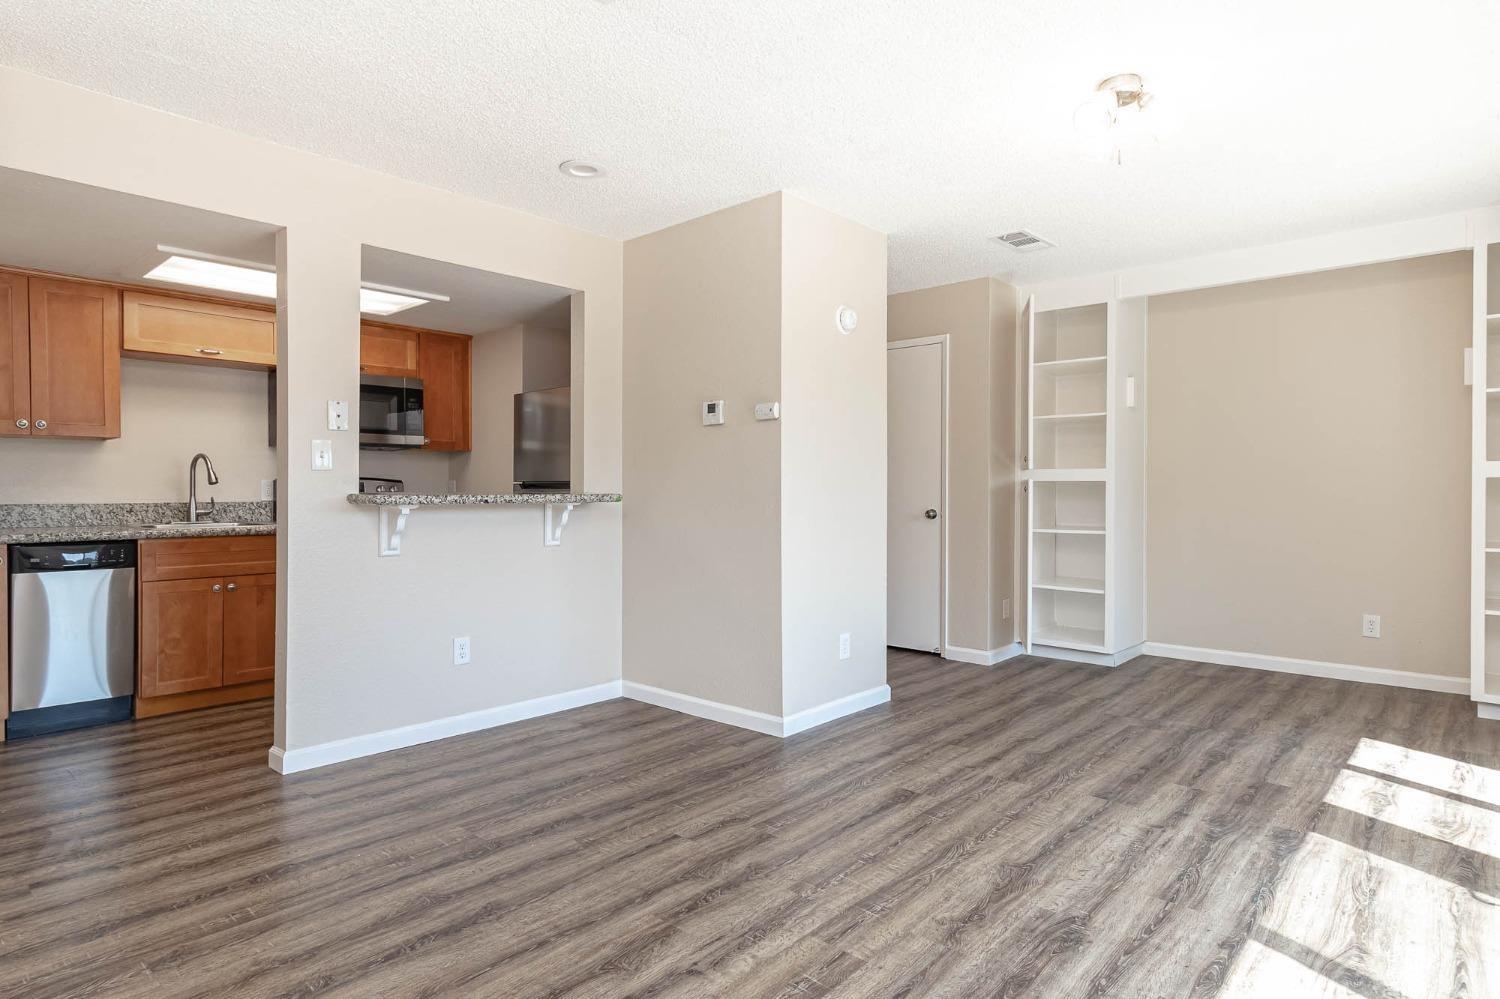 Photo of 3701 Colonial Dr #76 in Modesto, CA